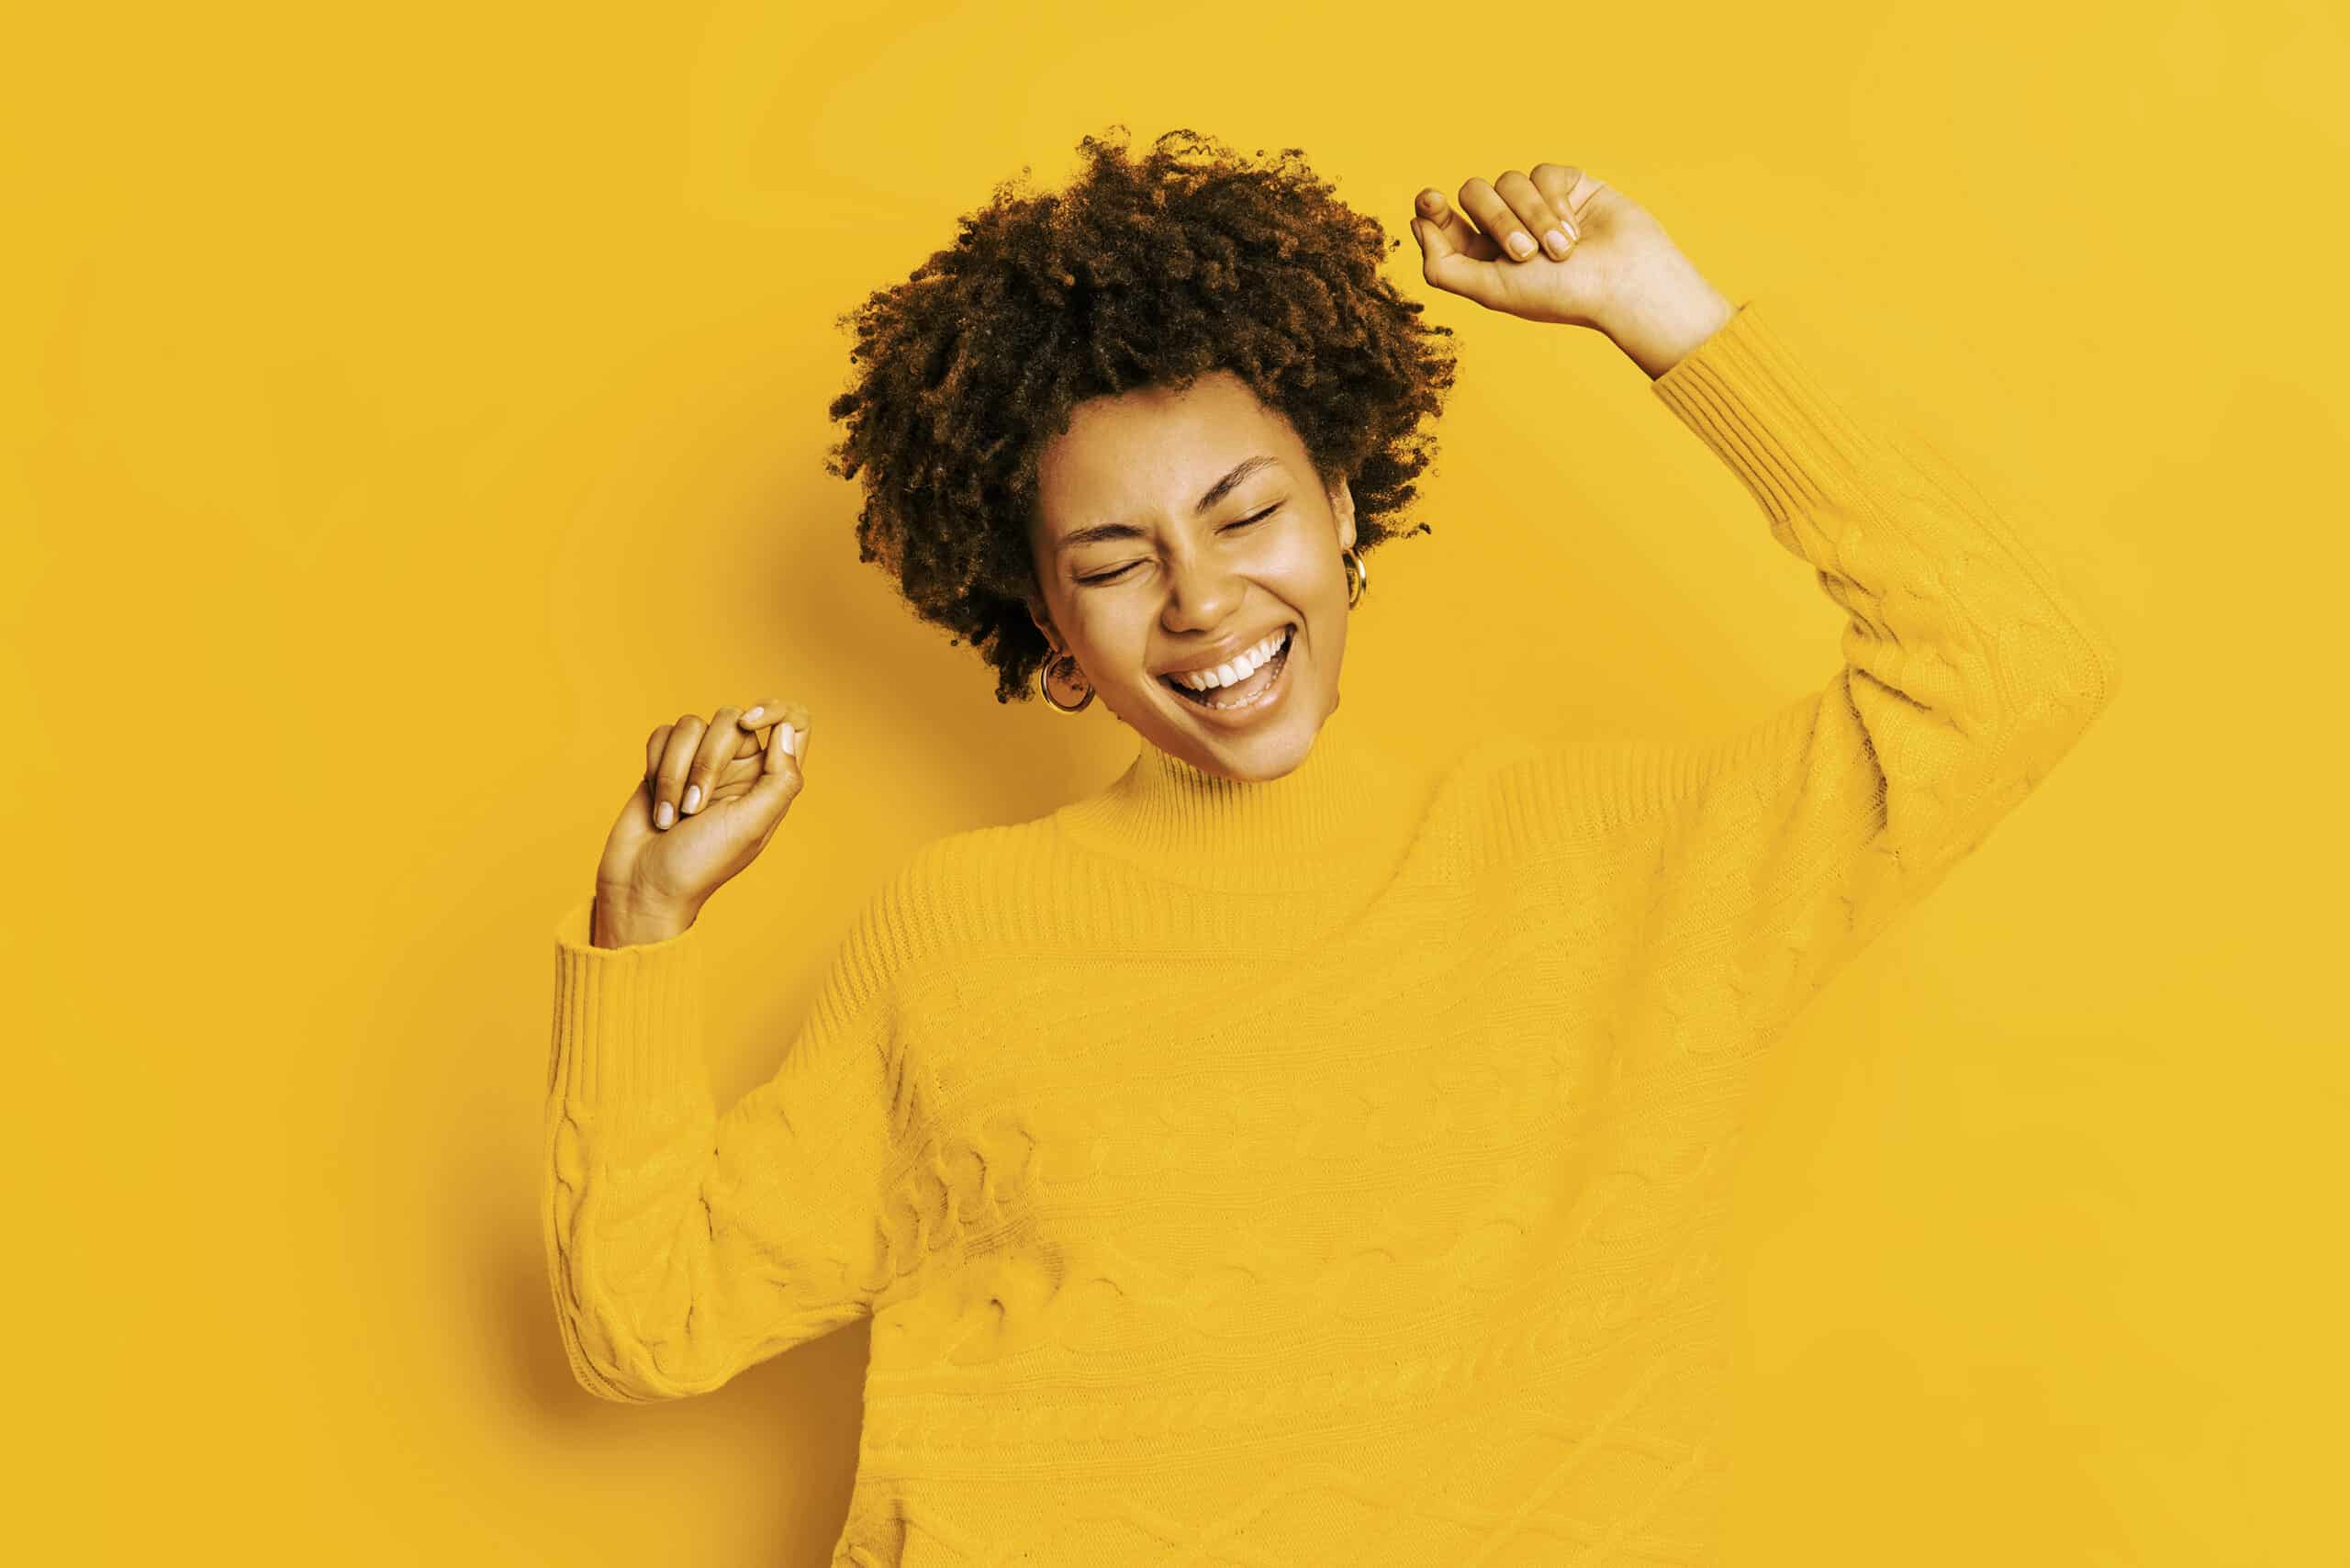 Lady happy dancing with a yellow background